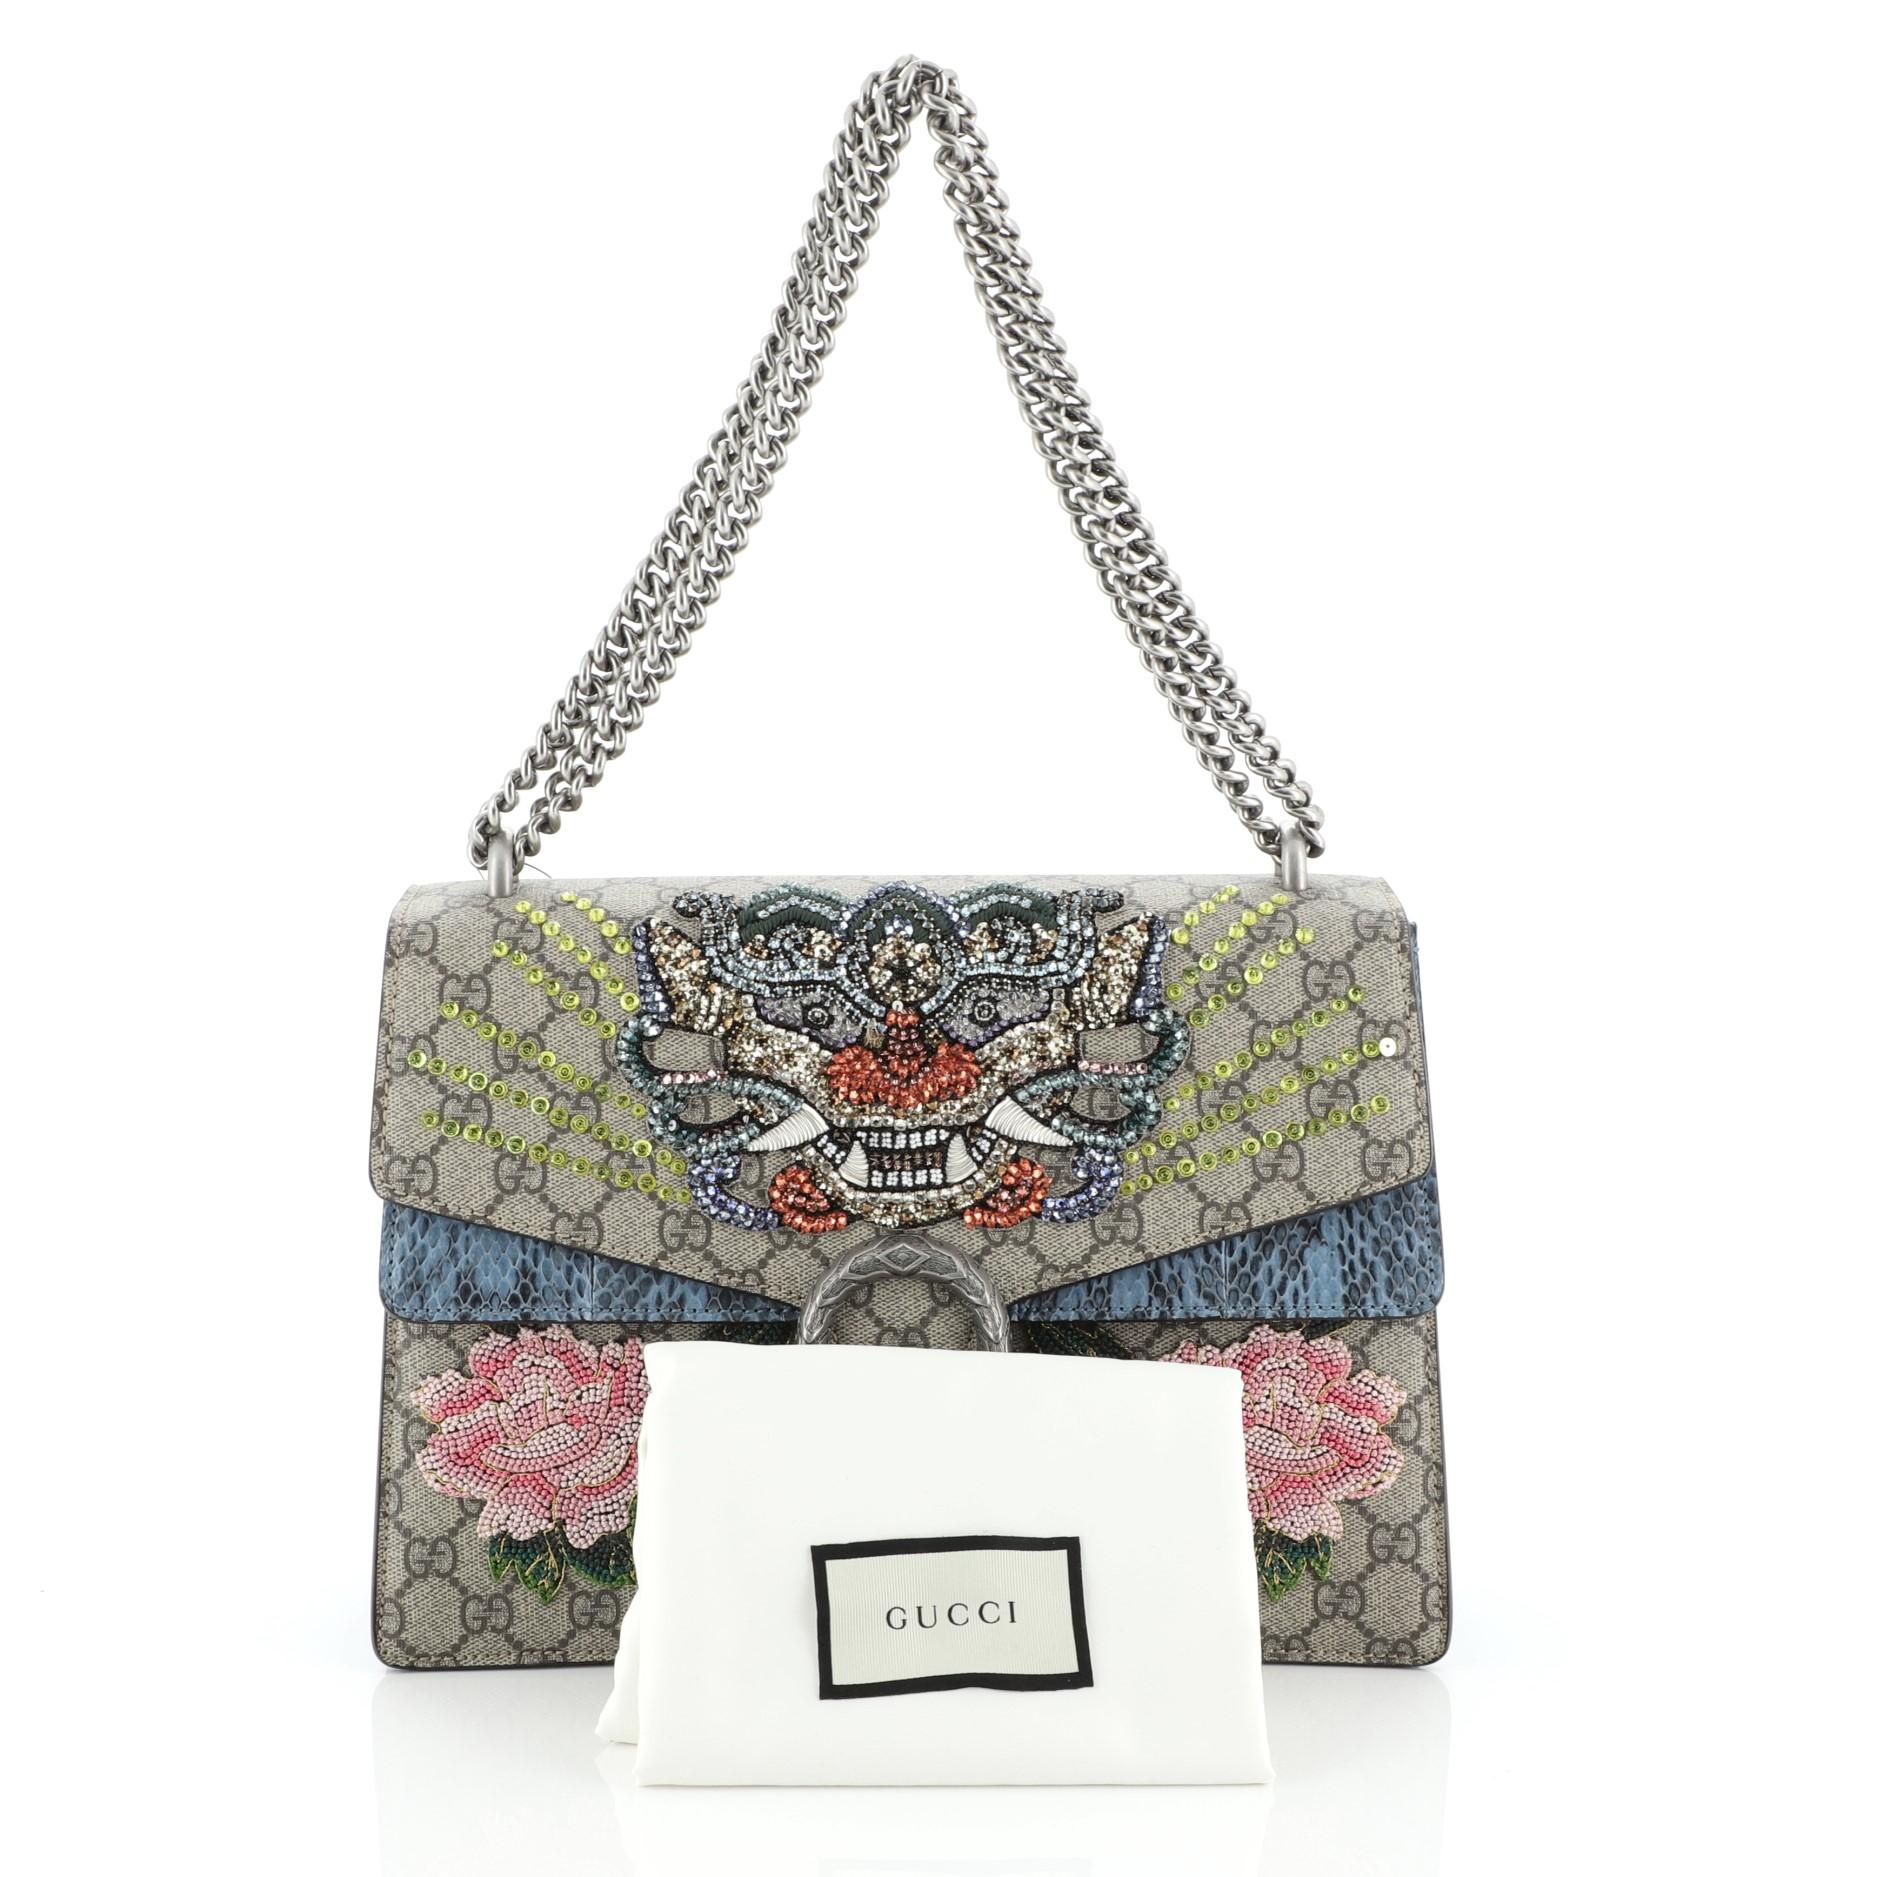 This Gucci Dionysus Bag Embellished GG Coated Canvas with Python Medium, crafted from embelished brown GG coated canvas genuine blue python skin, features chain link strap, textured tiger head spur detail on its flap, embroidery detailing, and aged